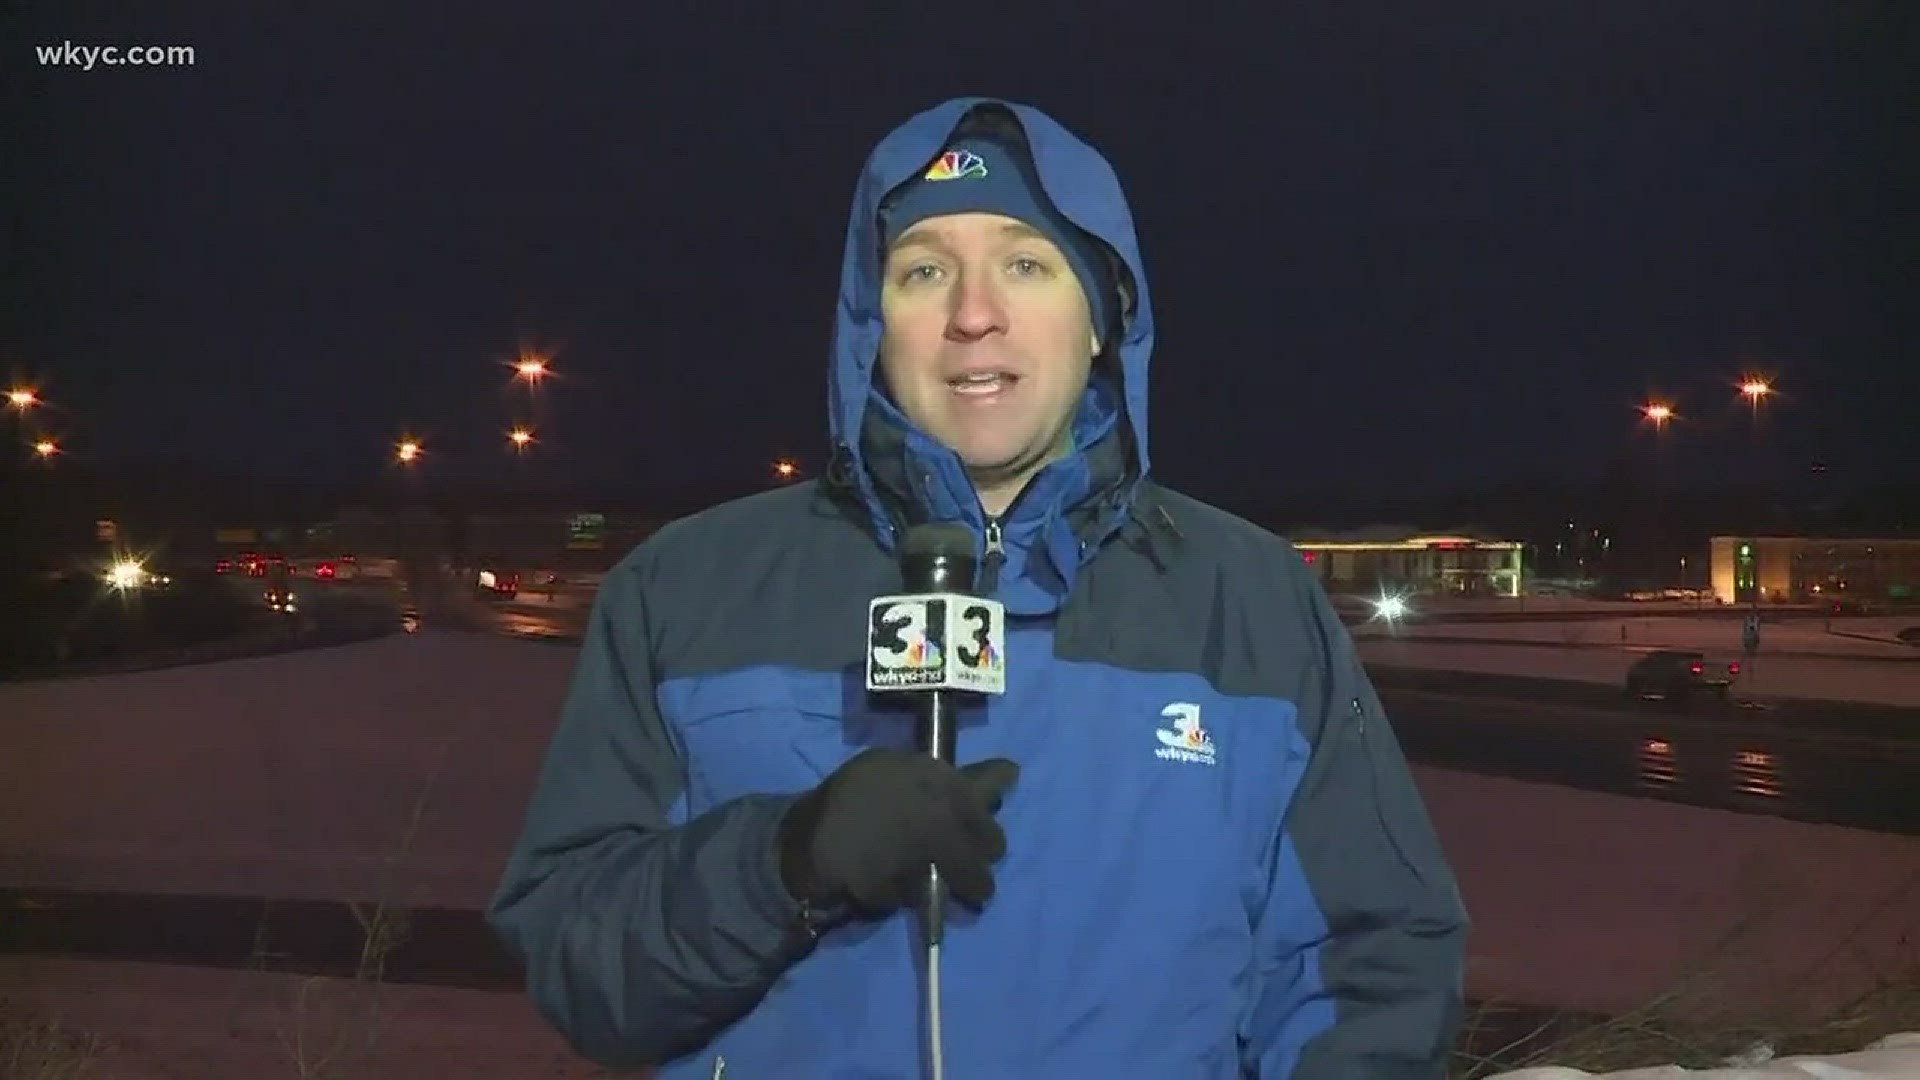 Ryan Haidet has an update on driving conditions in Summit County at I-77 at Rout 18.